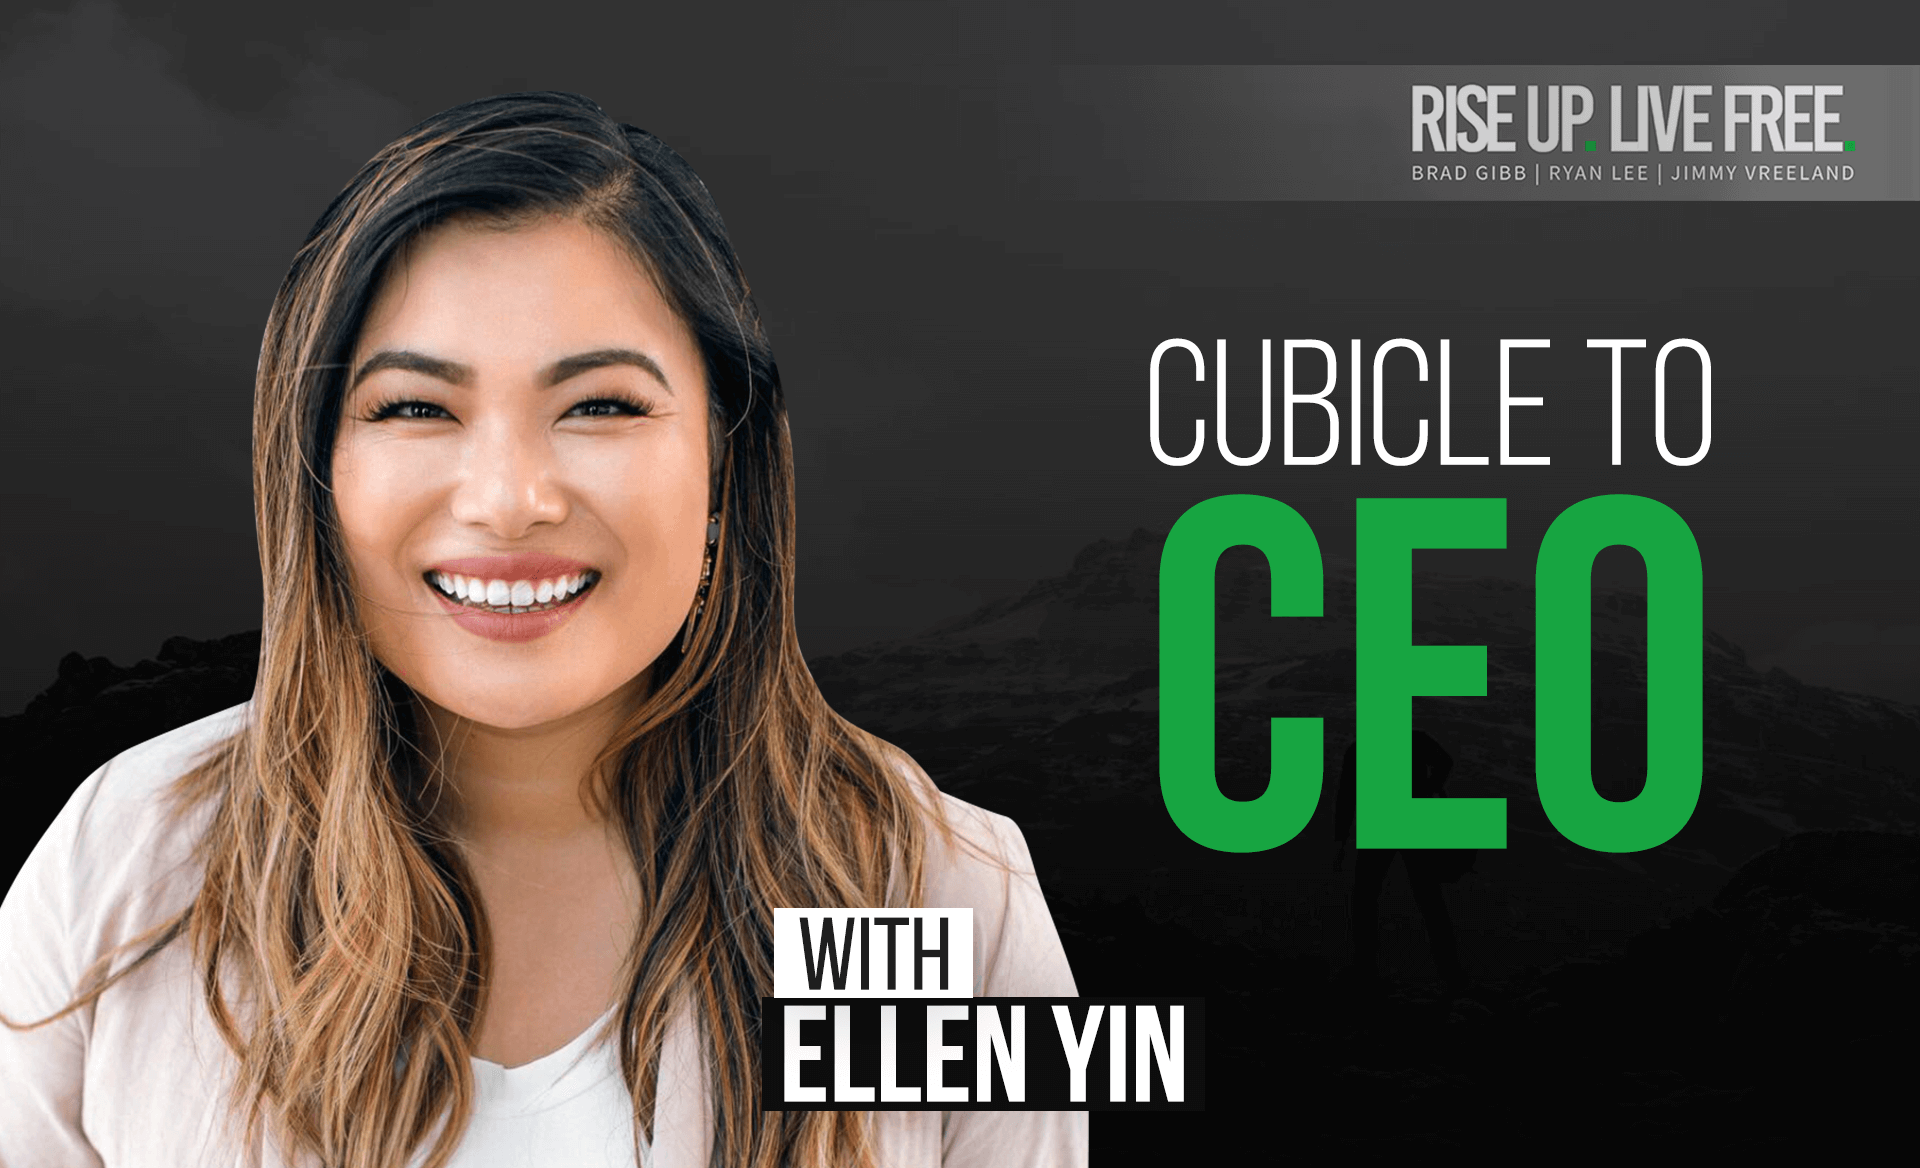 CUBICLE TO CEO WITH ELLEN YIN